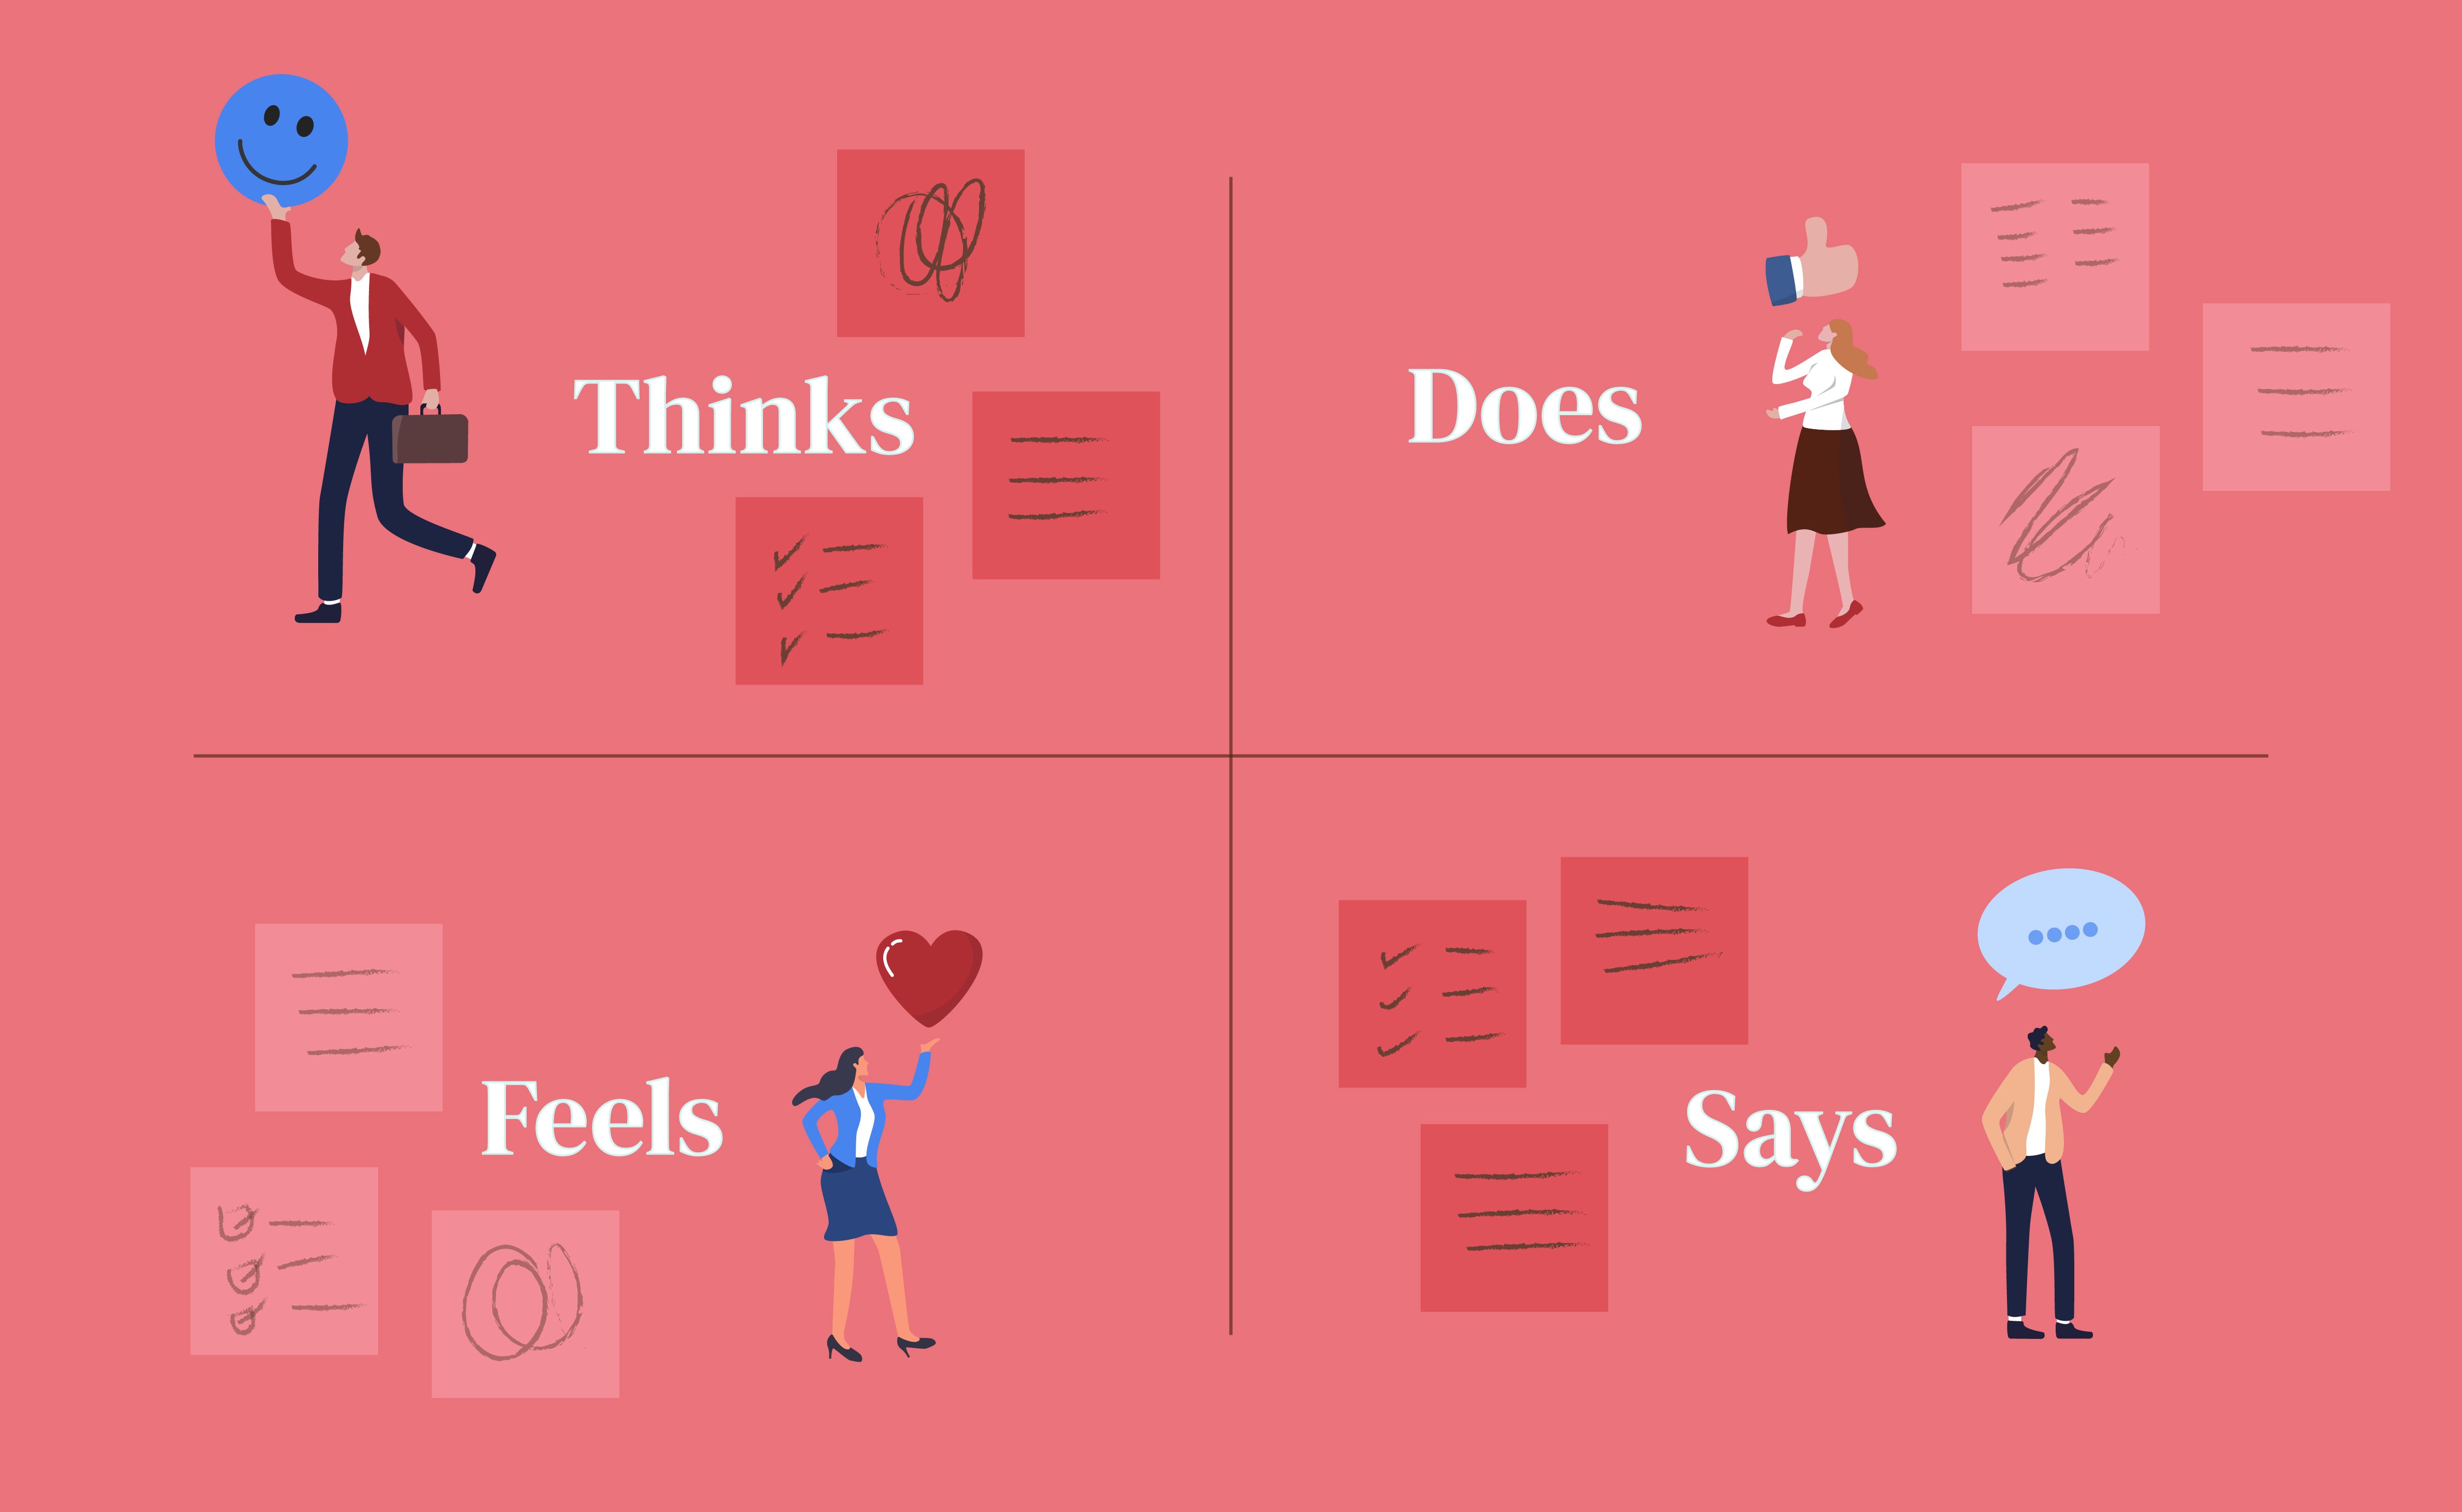 most companies will keep in mind how their customer thinks, what they do, how the feel, and what they say